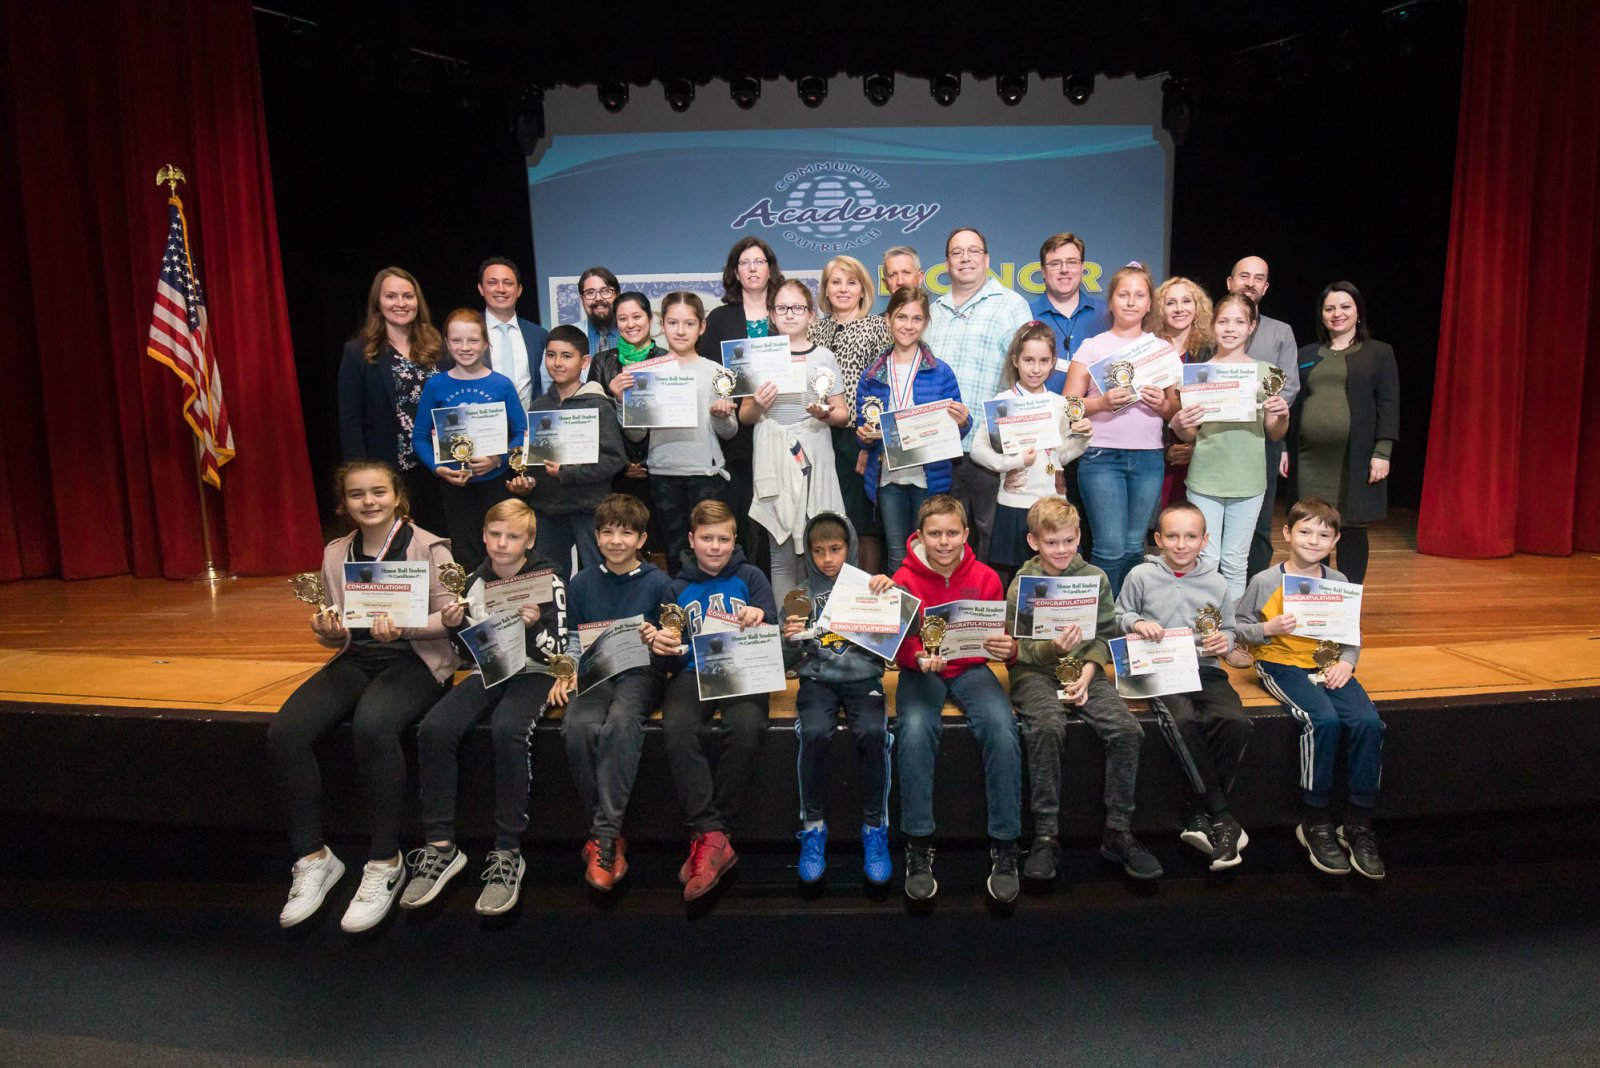 2nd Trimester Awards March 10, 2020